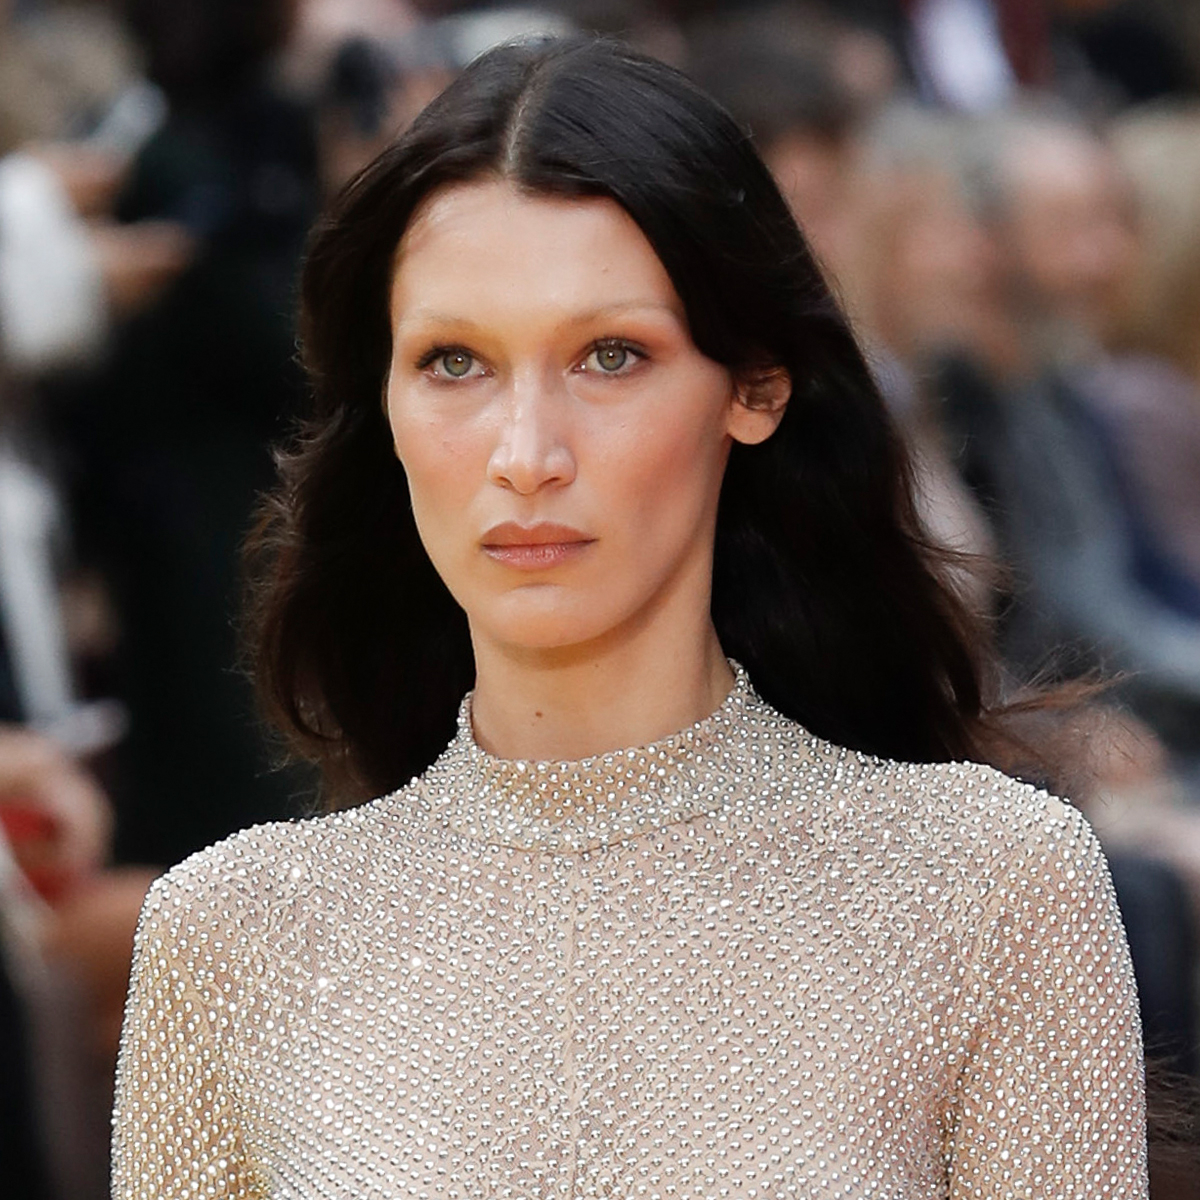 Bella Hadid Flaunts Abs Heading to Louis Vuitton Show During PFW